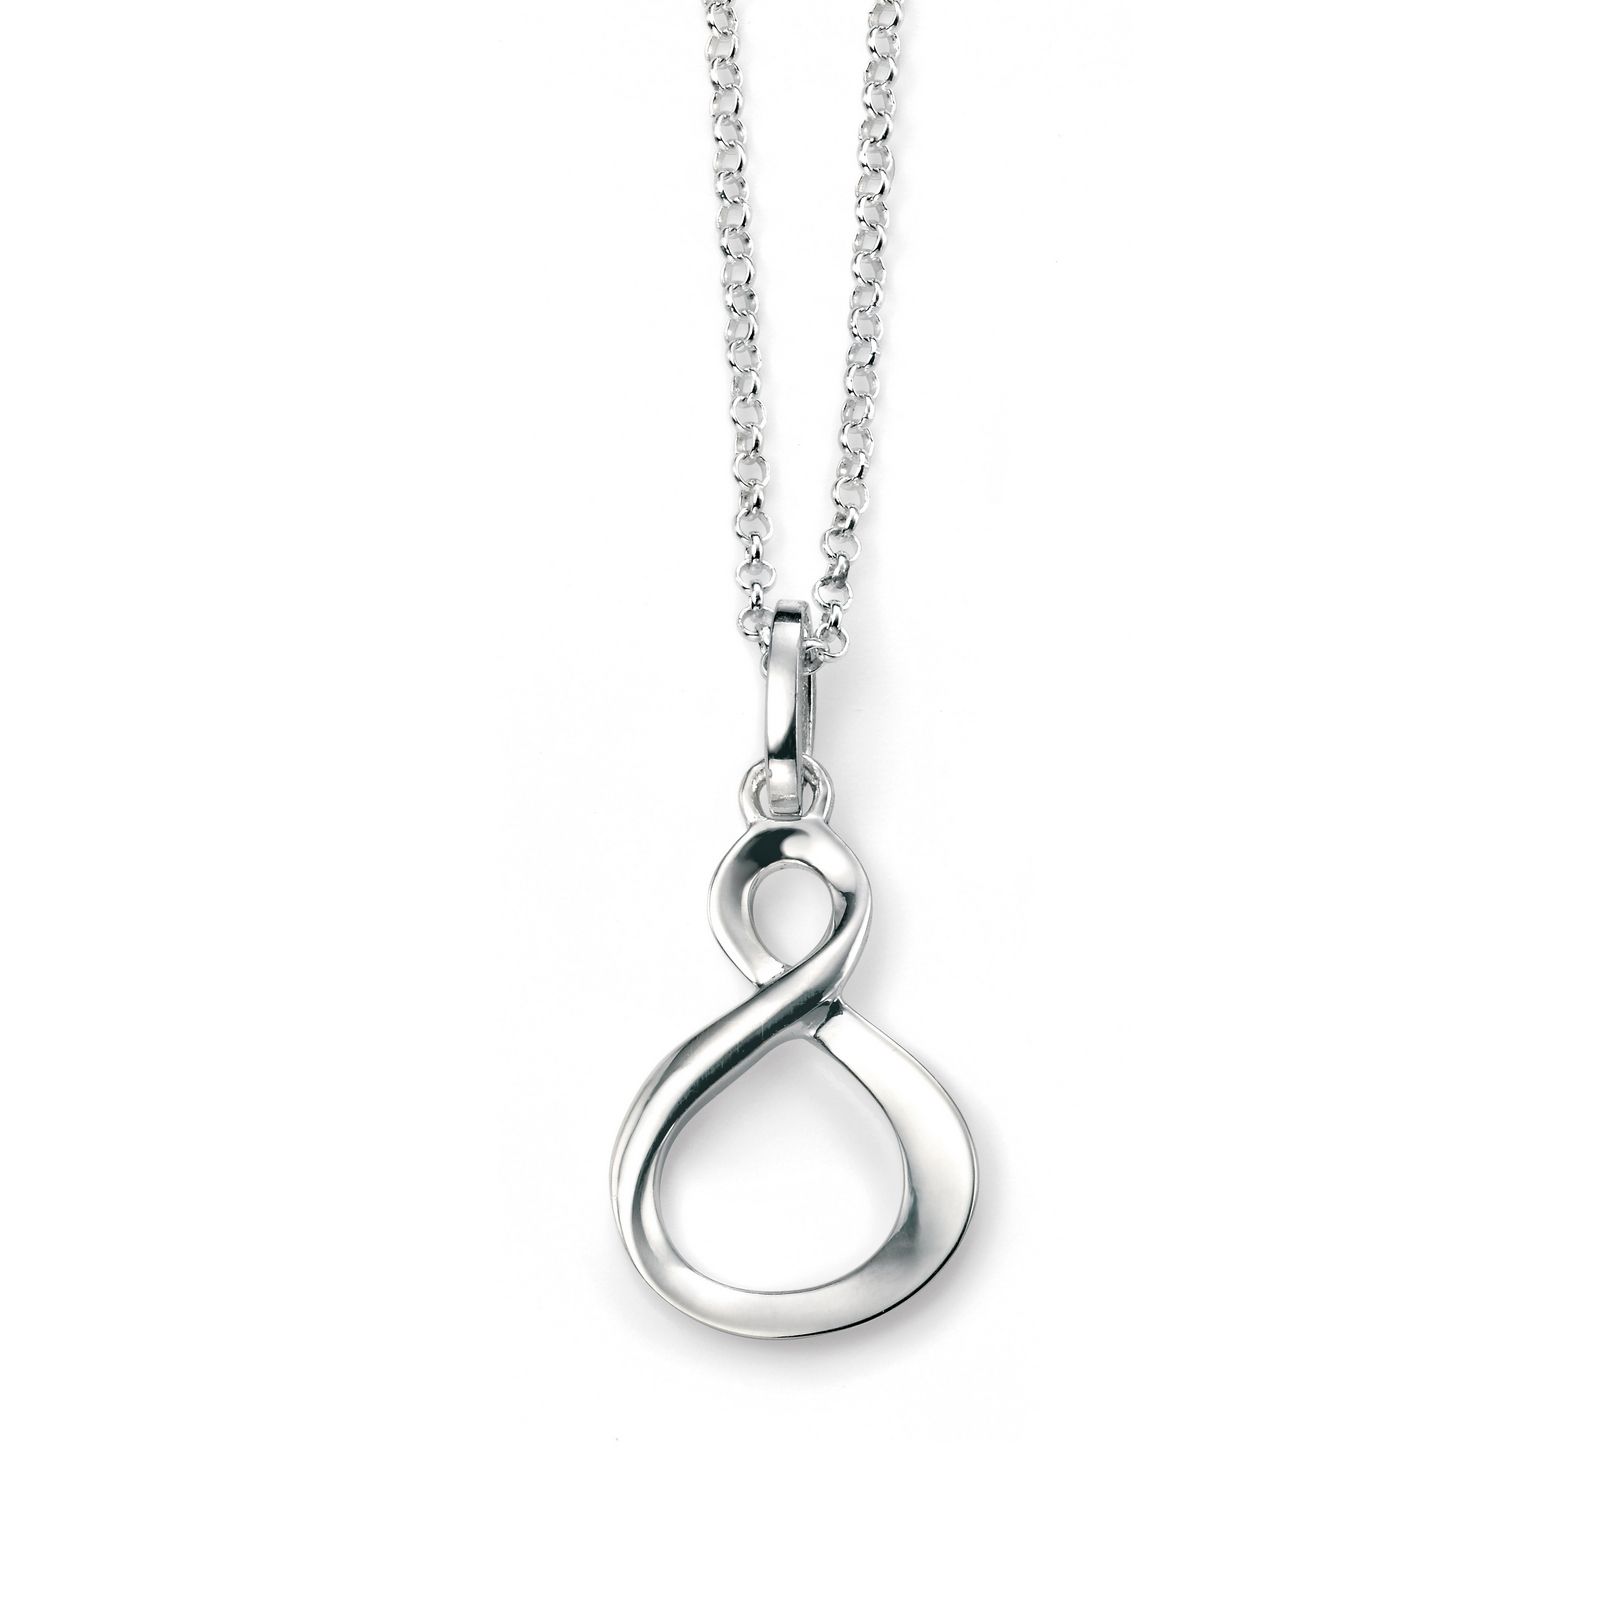 Elements Silver Infinity Loop Pendant Pertaining To Best And Newest Sparkling Infinity Locket Element Necklaces (View 3 of 25)